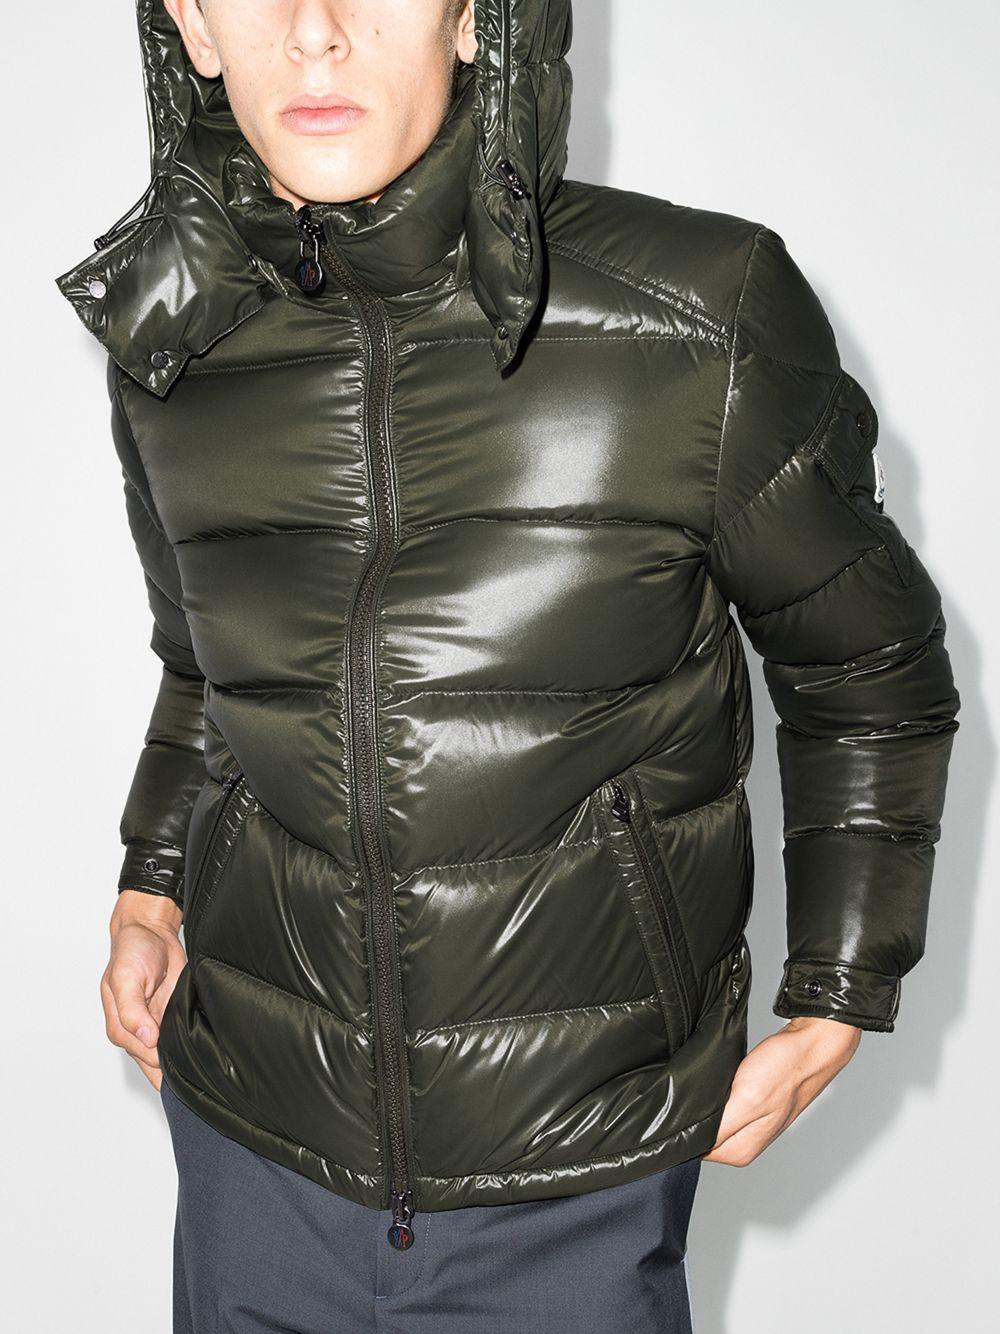 Moncler Synthetic Maya Down Jacket in Olive (Green) for Men - Save 62% -  Lyst